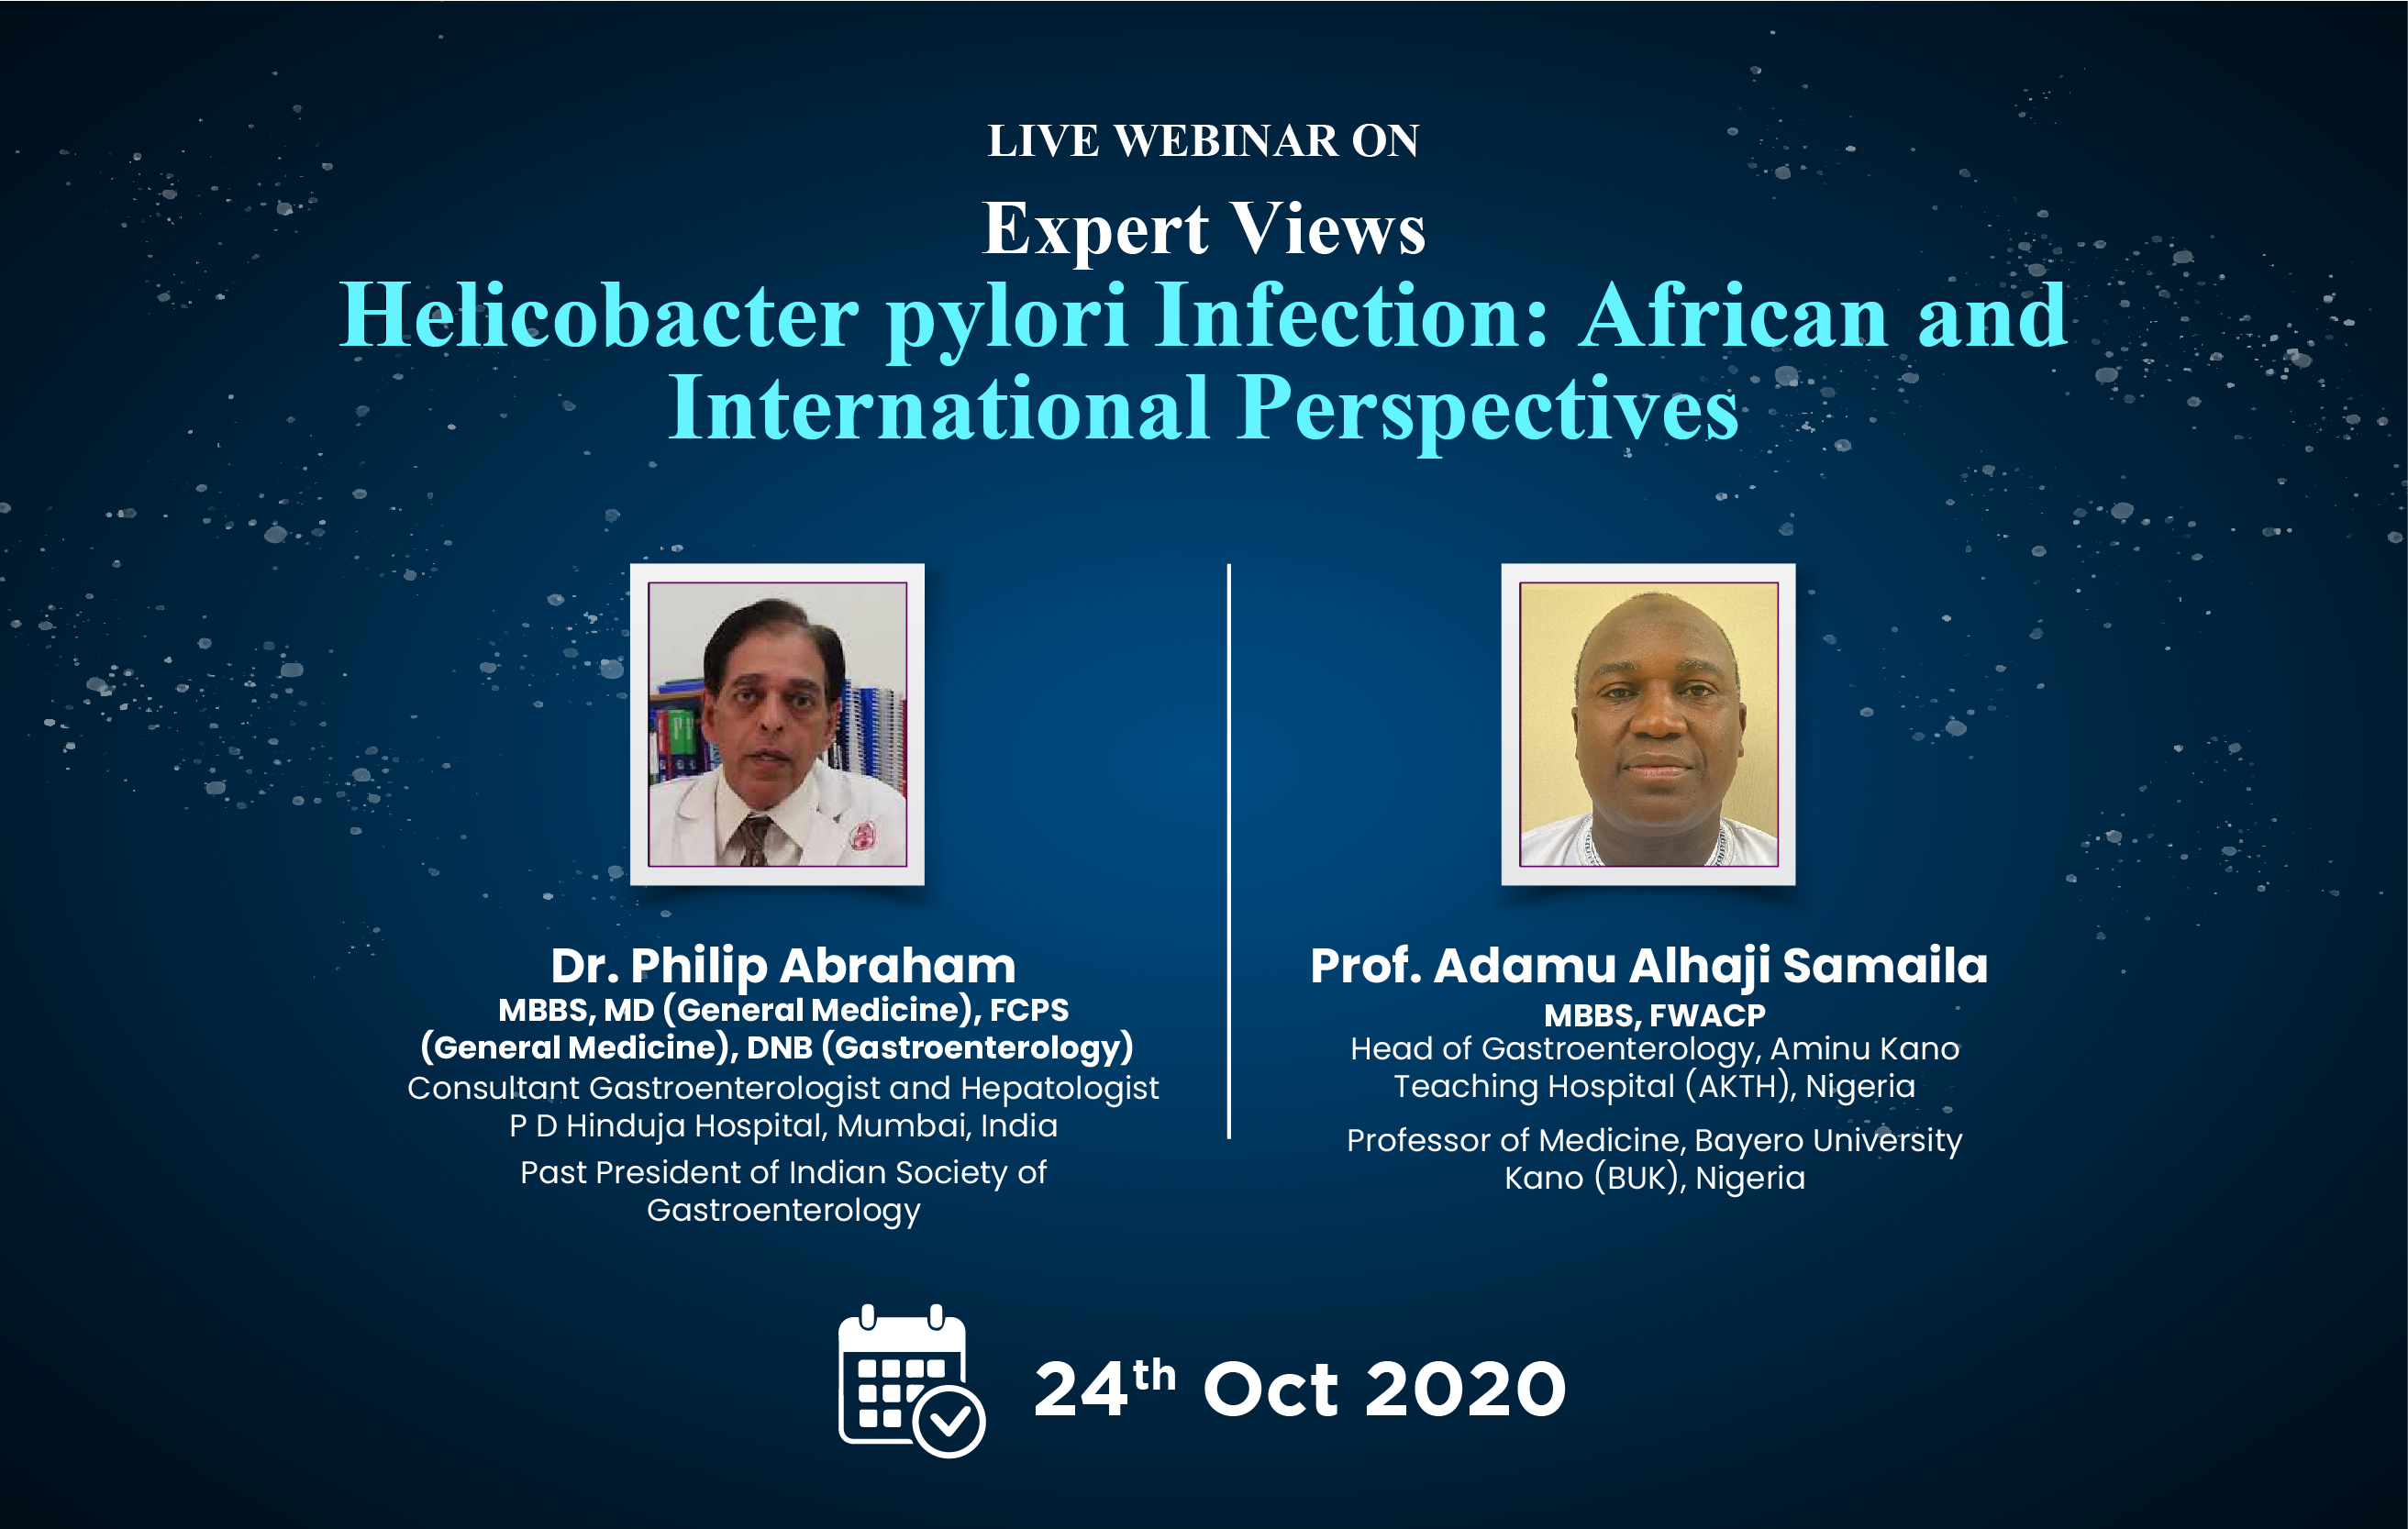 Helicobacter pylori Infection: African and International Perspectives